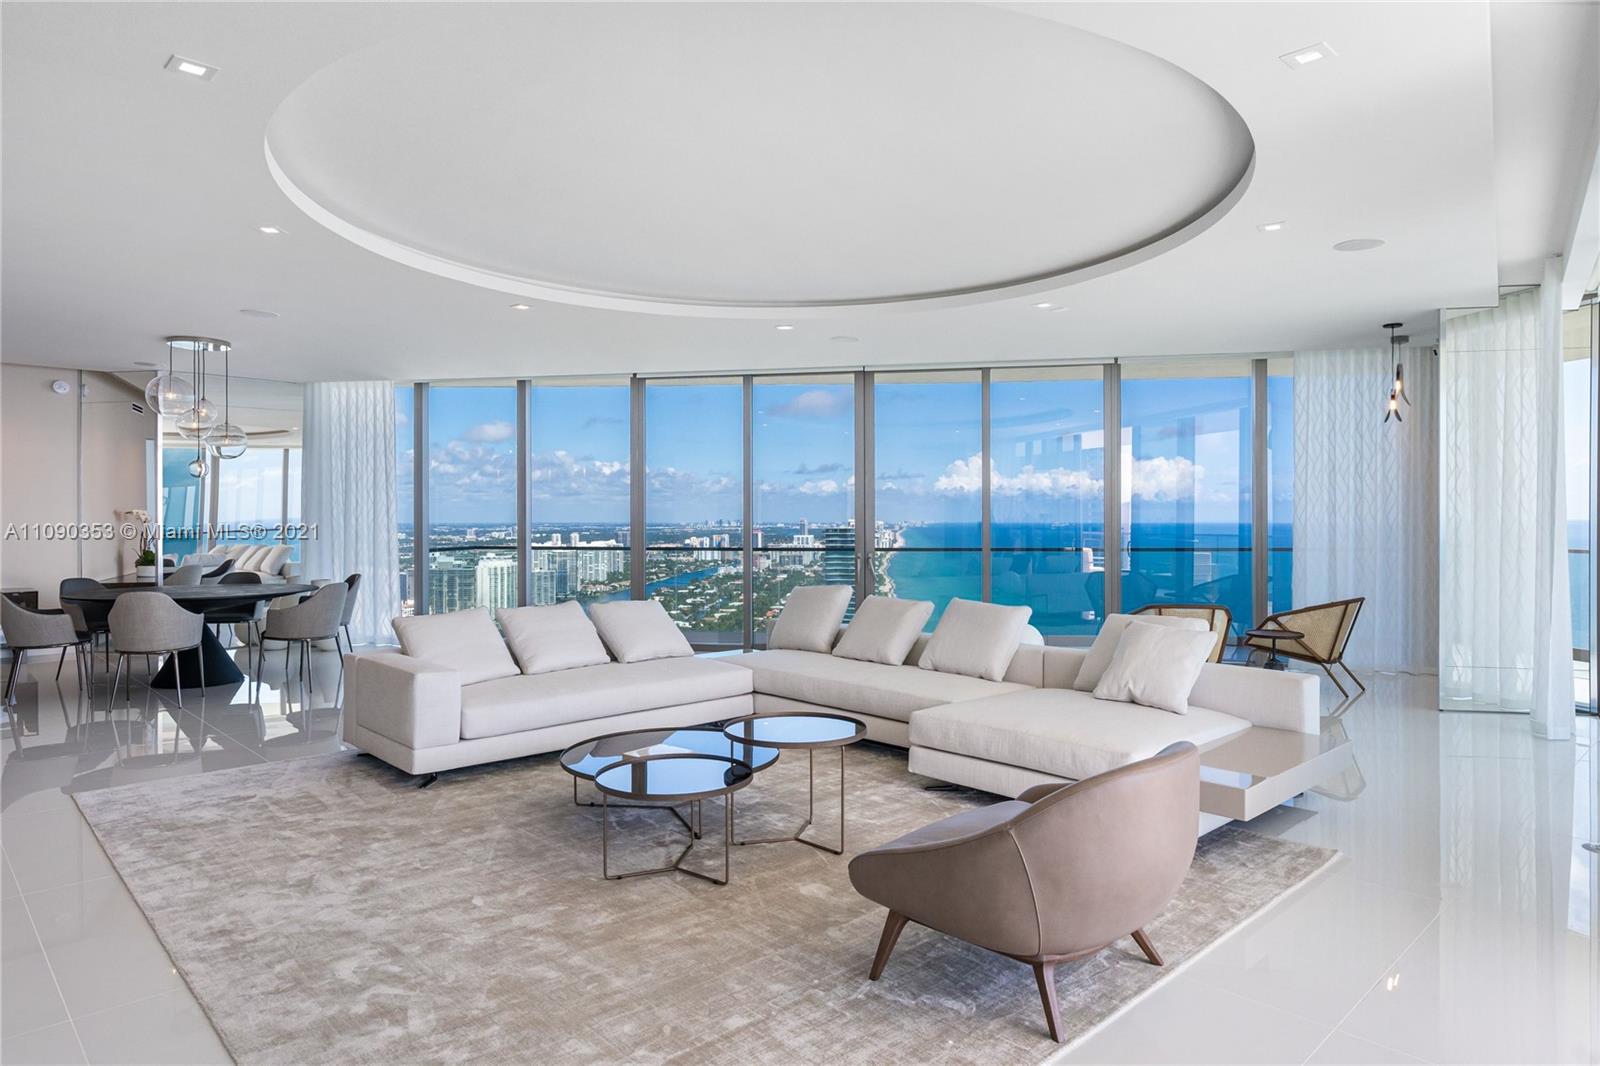 Highest Corner Wrap around Available in the Best Line "00" at Residences by Armani Casa. Residence #4600 is fully designer finished, features 4 bed/ 5 1/2 baths, oversized wrap around terrace, + nanny room. This layout is the best layout on the beach, Enjoy breathtaking views from South beach to Ft. Lauderdale ,Endless Ocean & Intracoastal from all areas. This Gem is fully Turnkey only "Toothbrush needed*   It is spacious modern & elegant w/ 10 Ft ceilings & Expansive deep balconies boasting summer kitchen create a seamless expansion of living space into the fresh Ocean Air, Chic European kitchen. Smart home w/ digital techknowlogy. Master Suite includes midnight bar.  Residents will enjoy beach service, full service spa, private restaurant, game room, cigar/wine room, & child's play room.